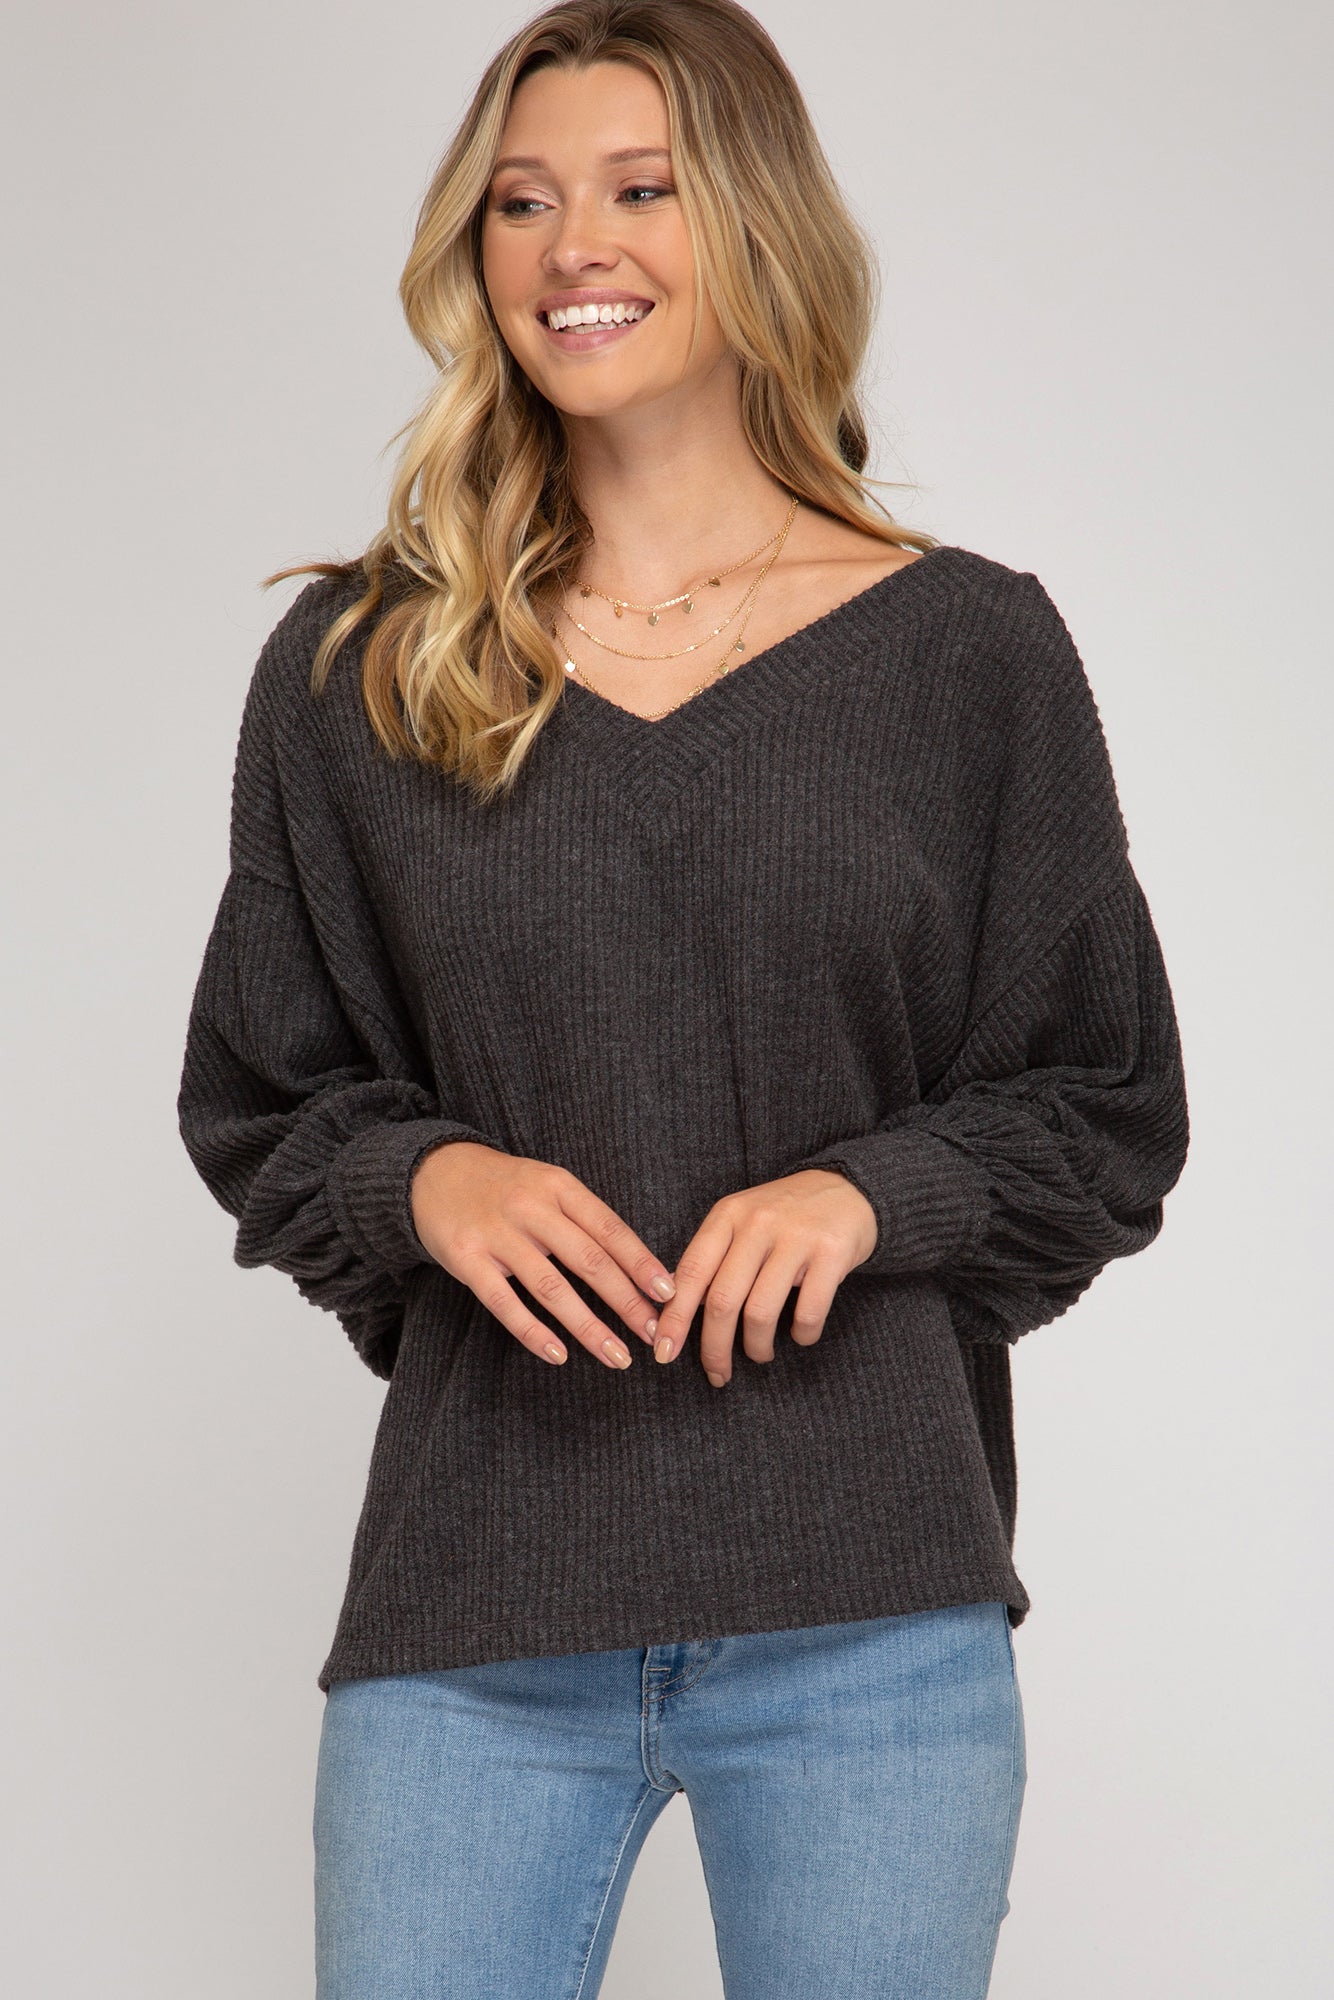 Long Sleeve Top With Brush Rib Knit Material!